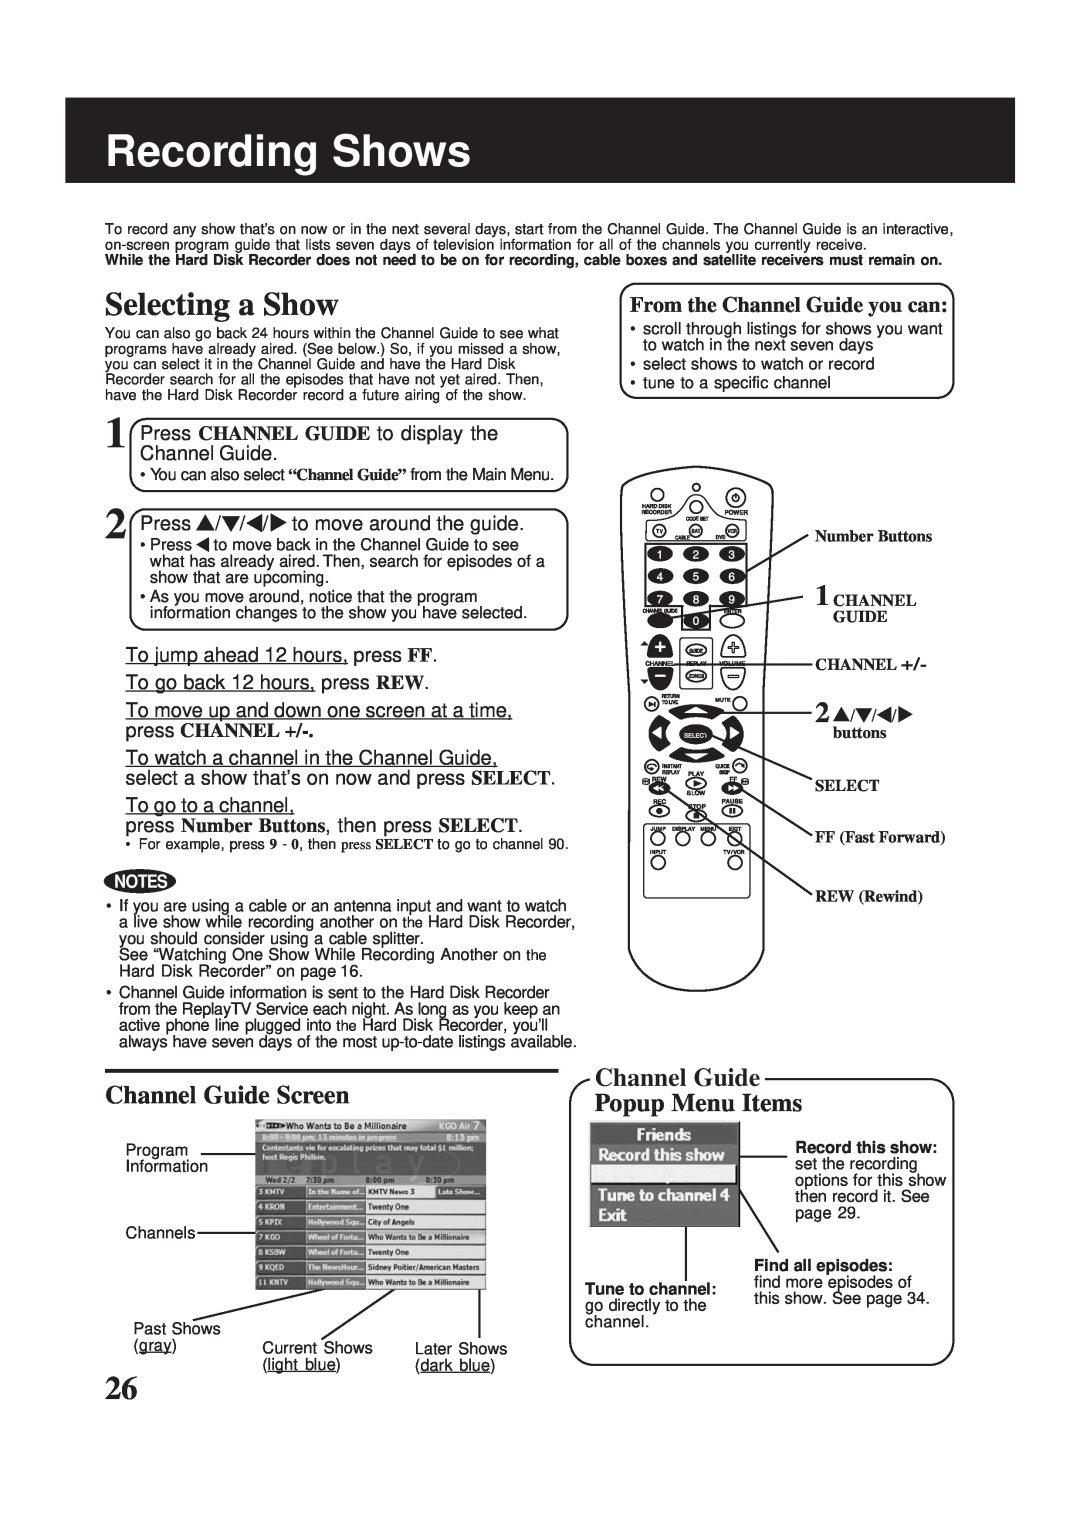 Panasonic PV-HS2000 Recording Shows, Selecting a Show, Channel Guide Screen, Channel Guide Popup Menu Items 